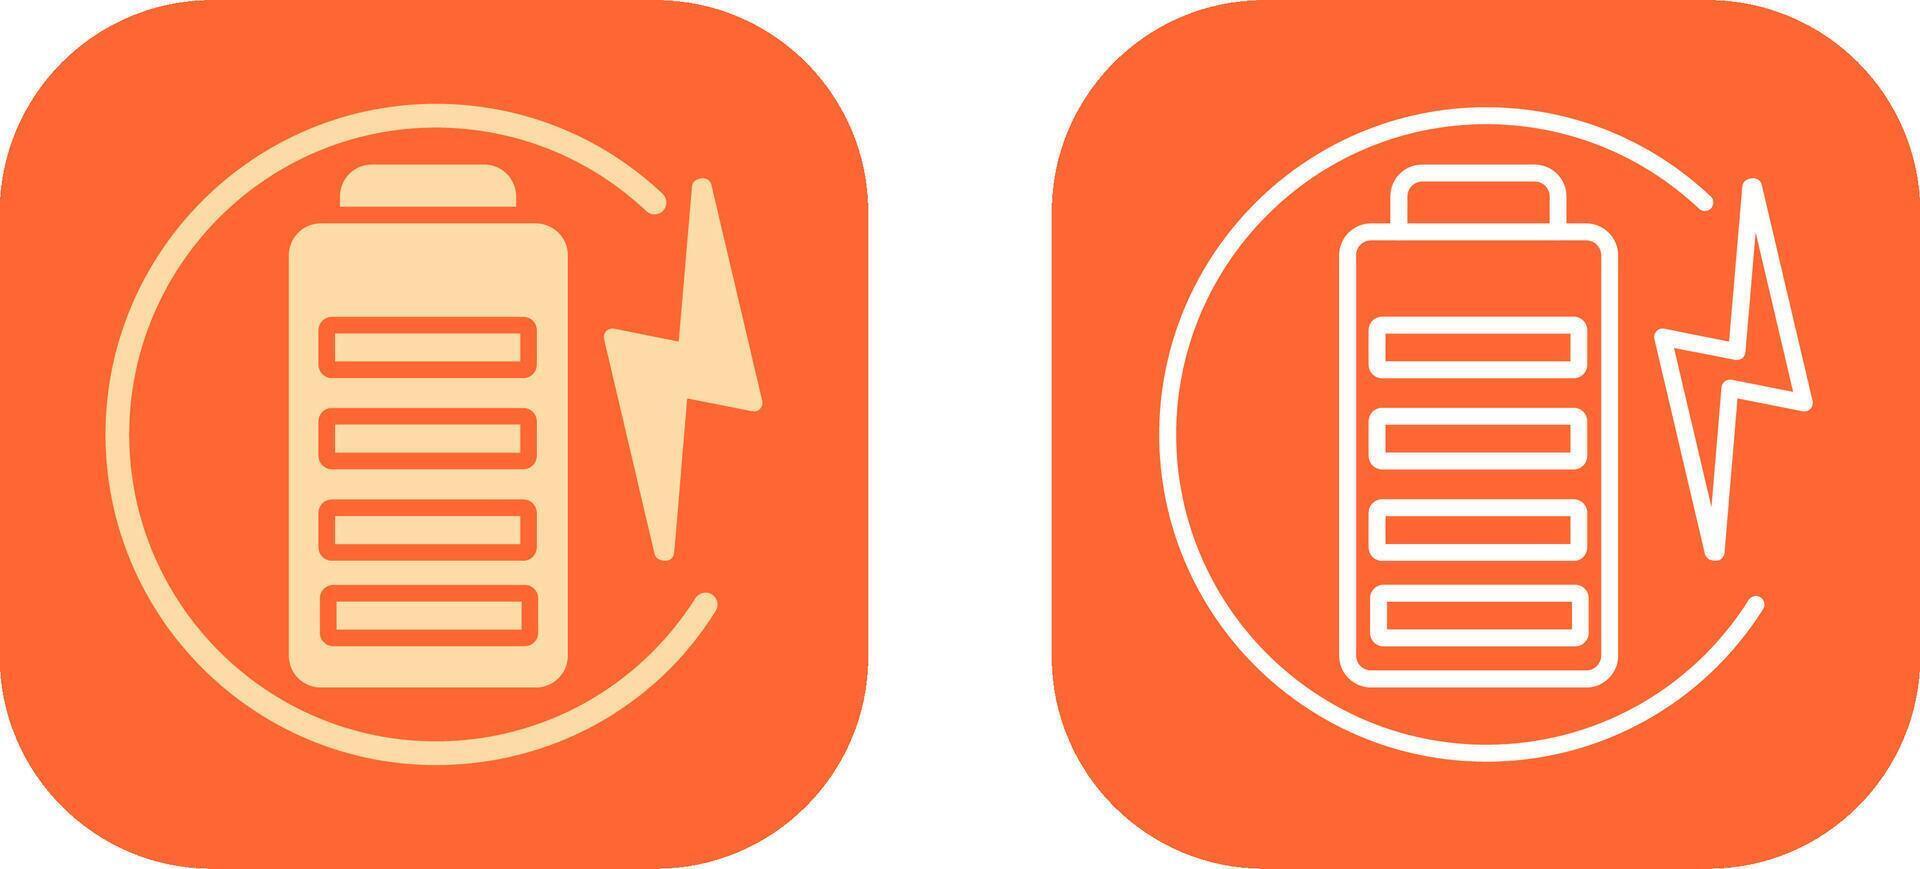 Charge Battery Icon Design vector